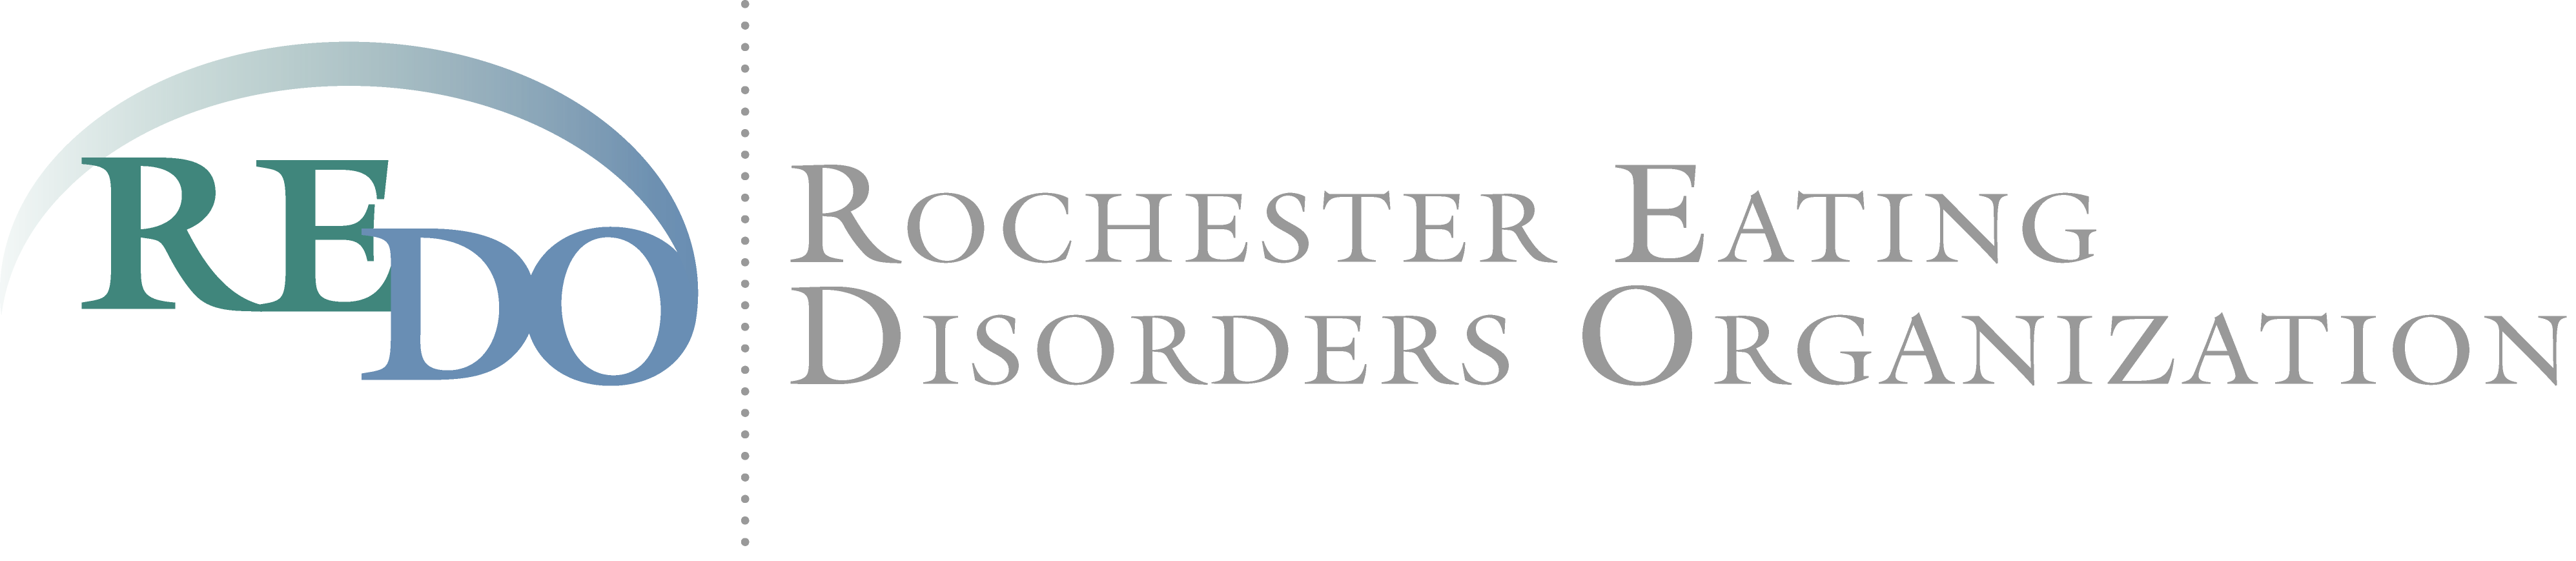 Rochester Eating Disorders Organization